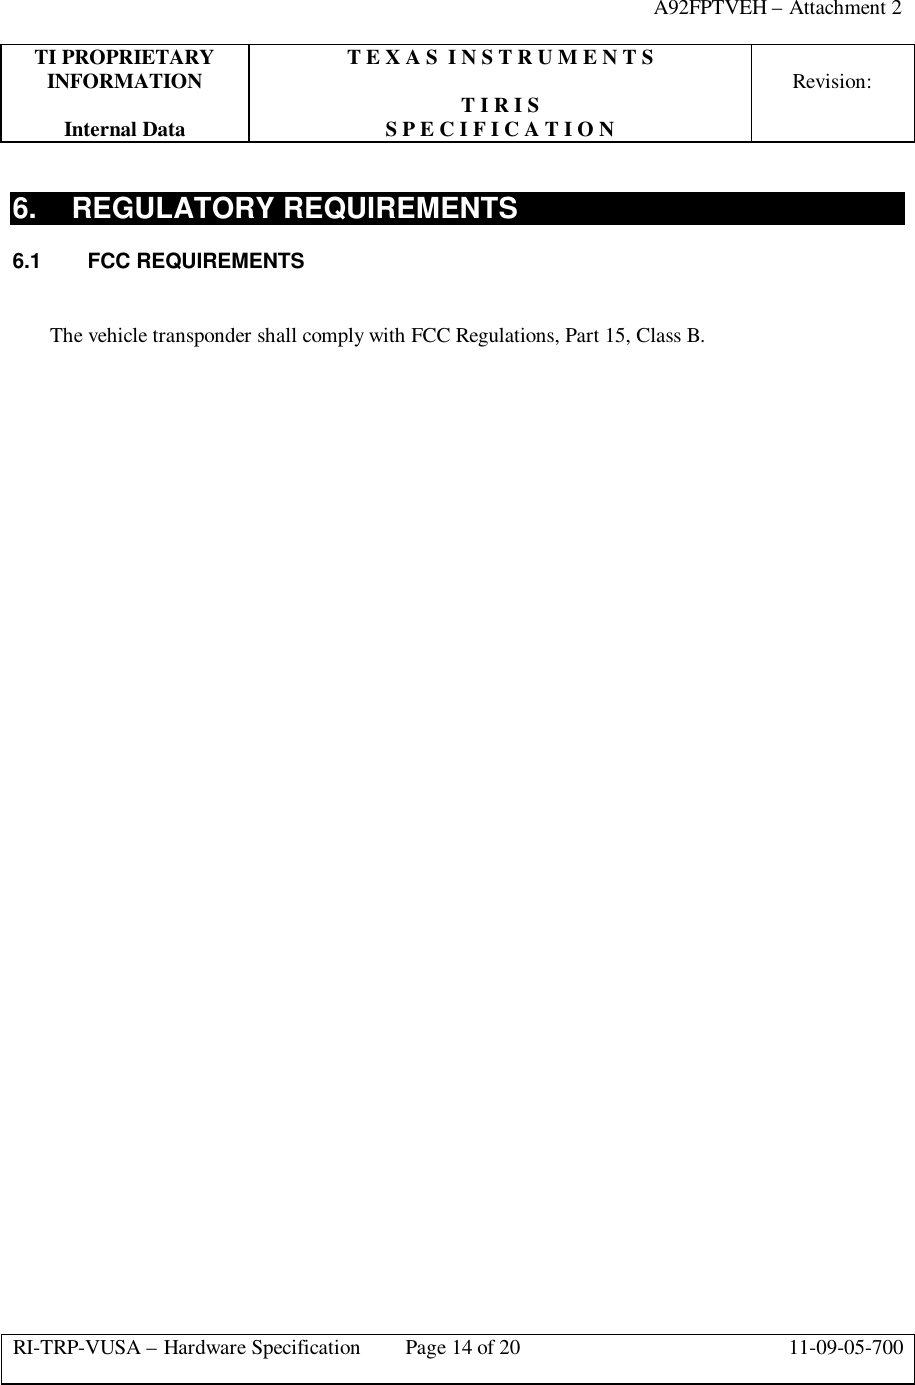 A92FPTVEH – Attachment 2TI PROPRIETARY T E X A S  I N S T R U M E N T SINFORMATION Revision:T I R I SInternal Data S P E C I F I C A T I O NRI-TRP-VUSA – Hardware Specification Page 14 of 20 11-09-05-7006. REGULATORY REQUIREMENTS6.1 FCC REQUIREMENTSThe vehicle transponder shall comply with FCC Regulations, Part 15, Class B.